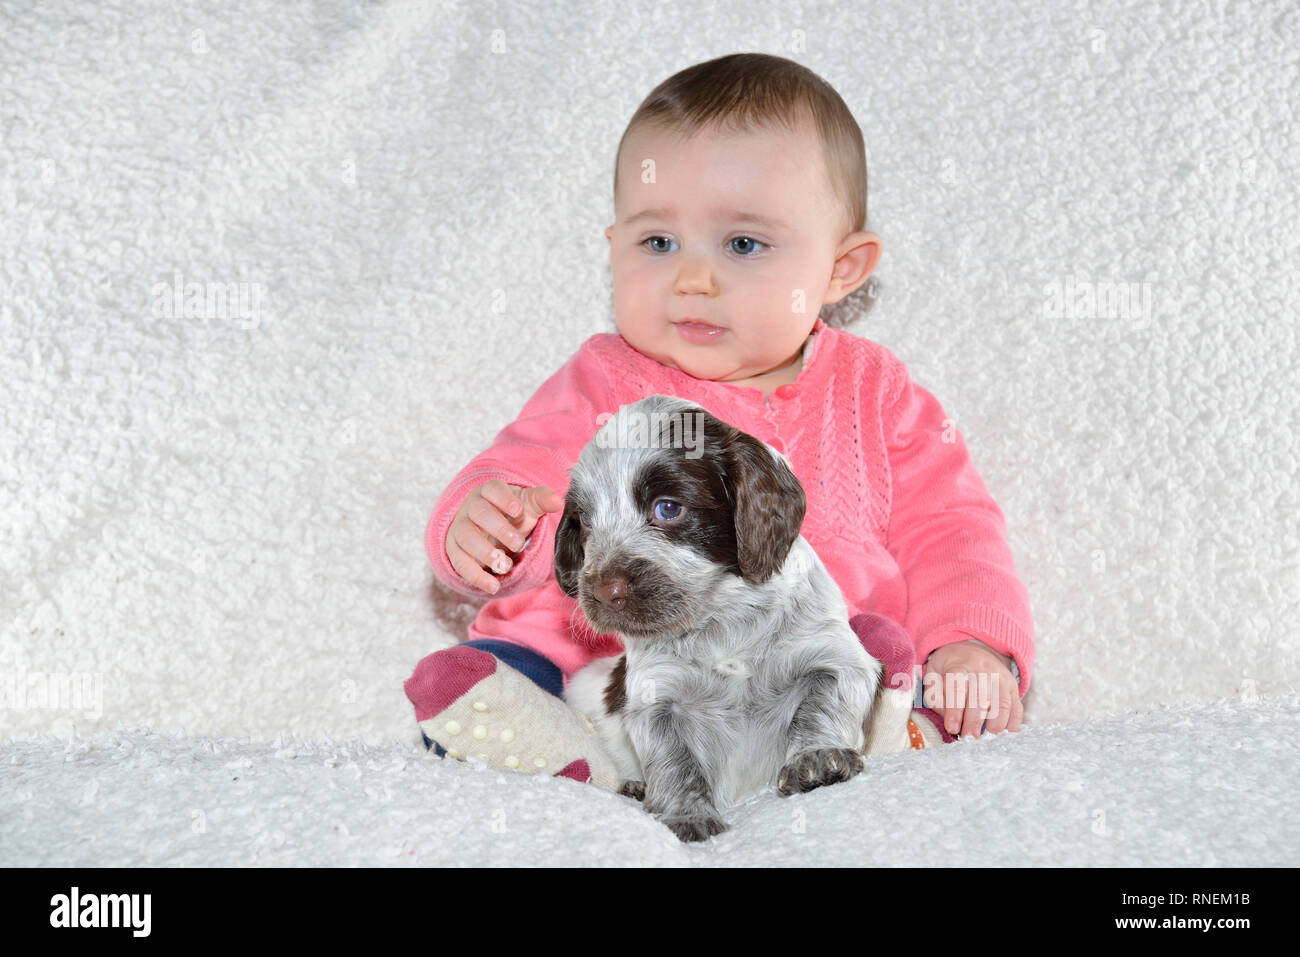 7 month baby girl with young sprocker spaniel puppy dog Stock Photo